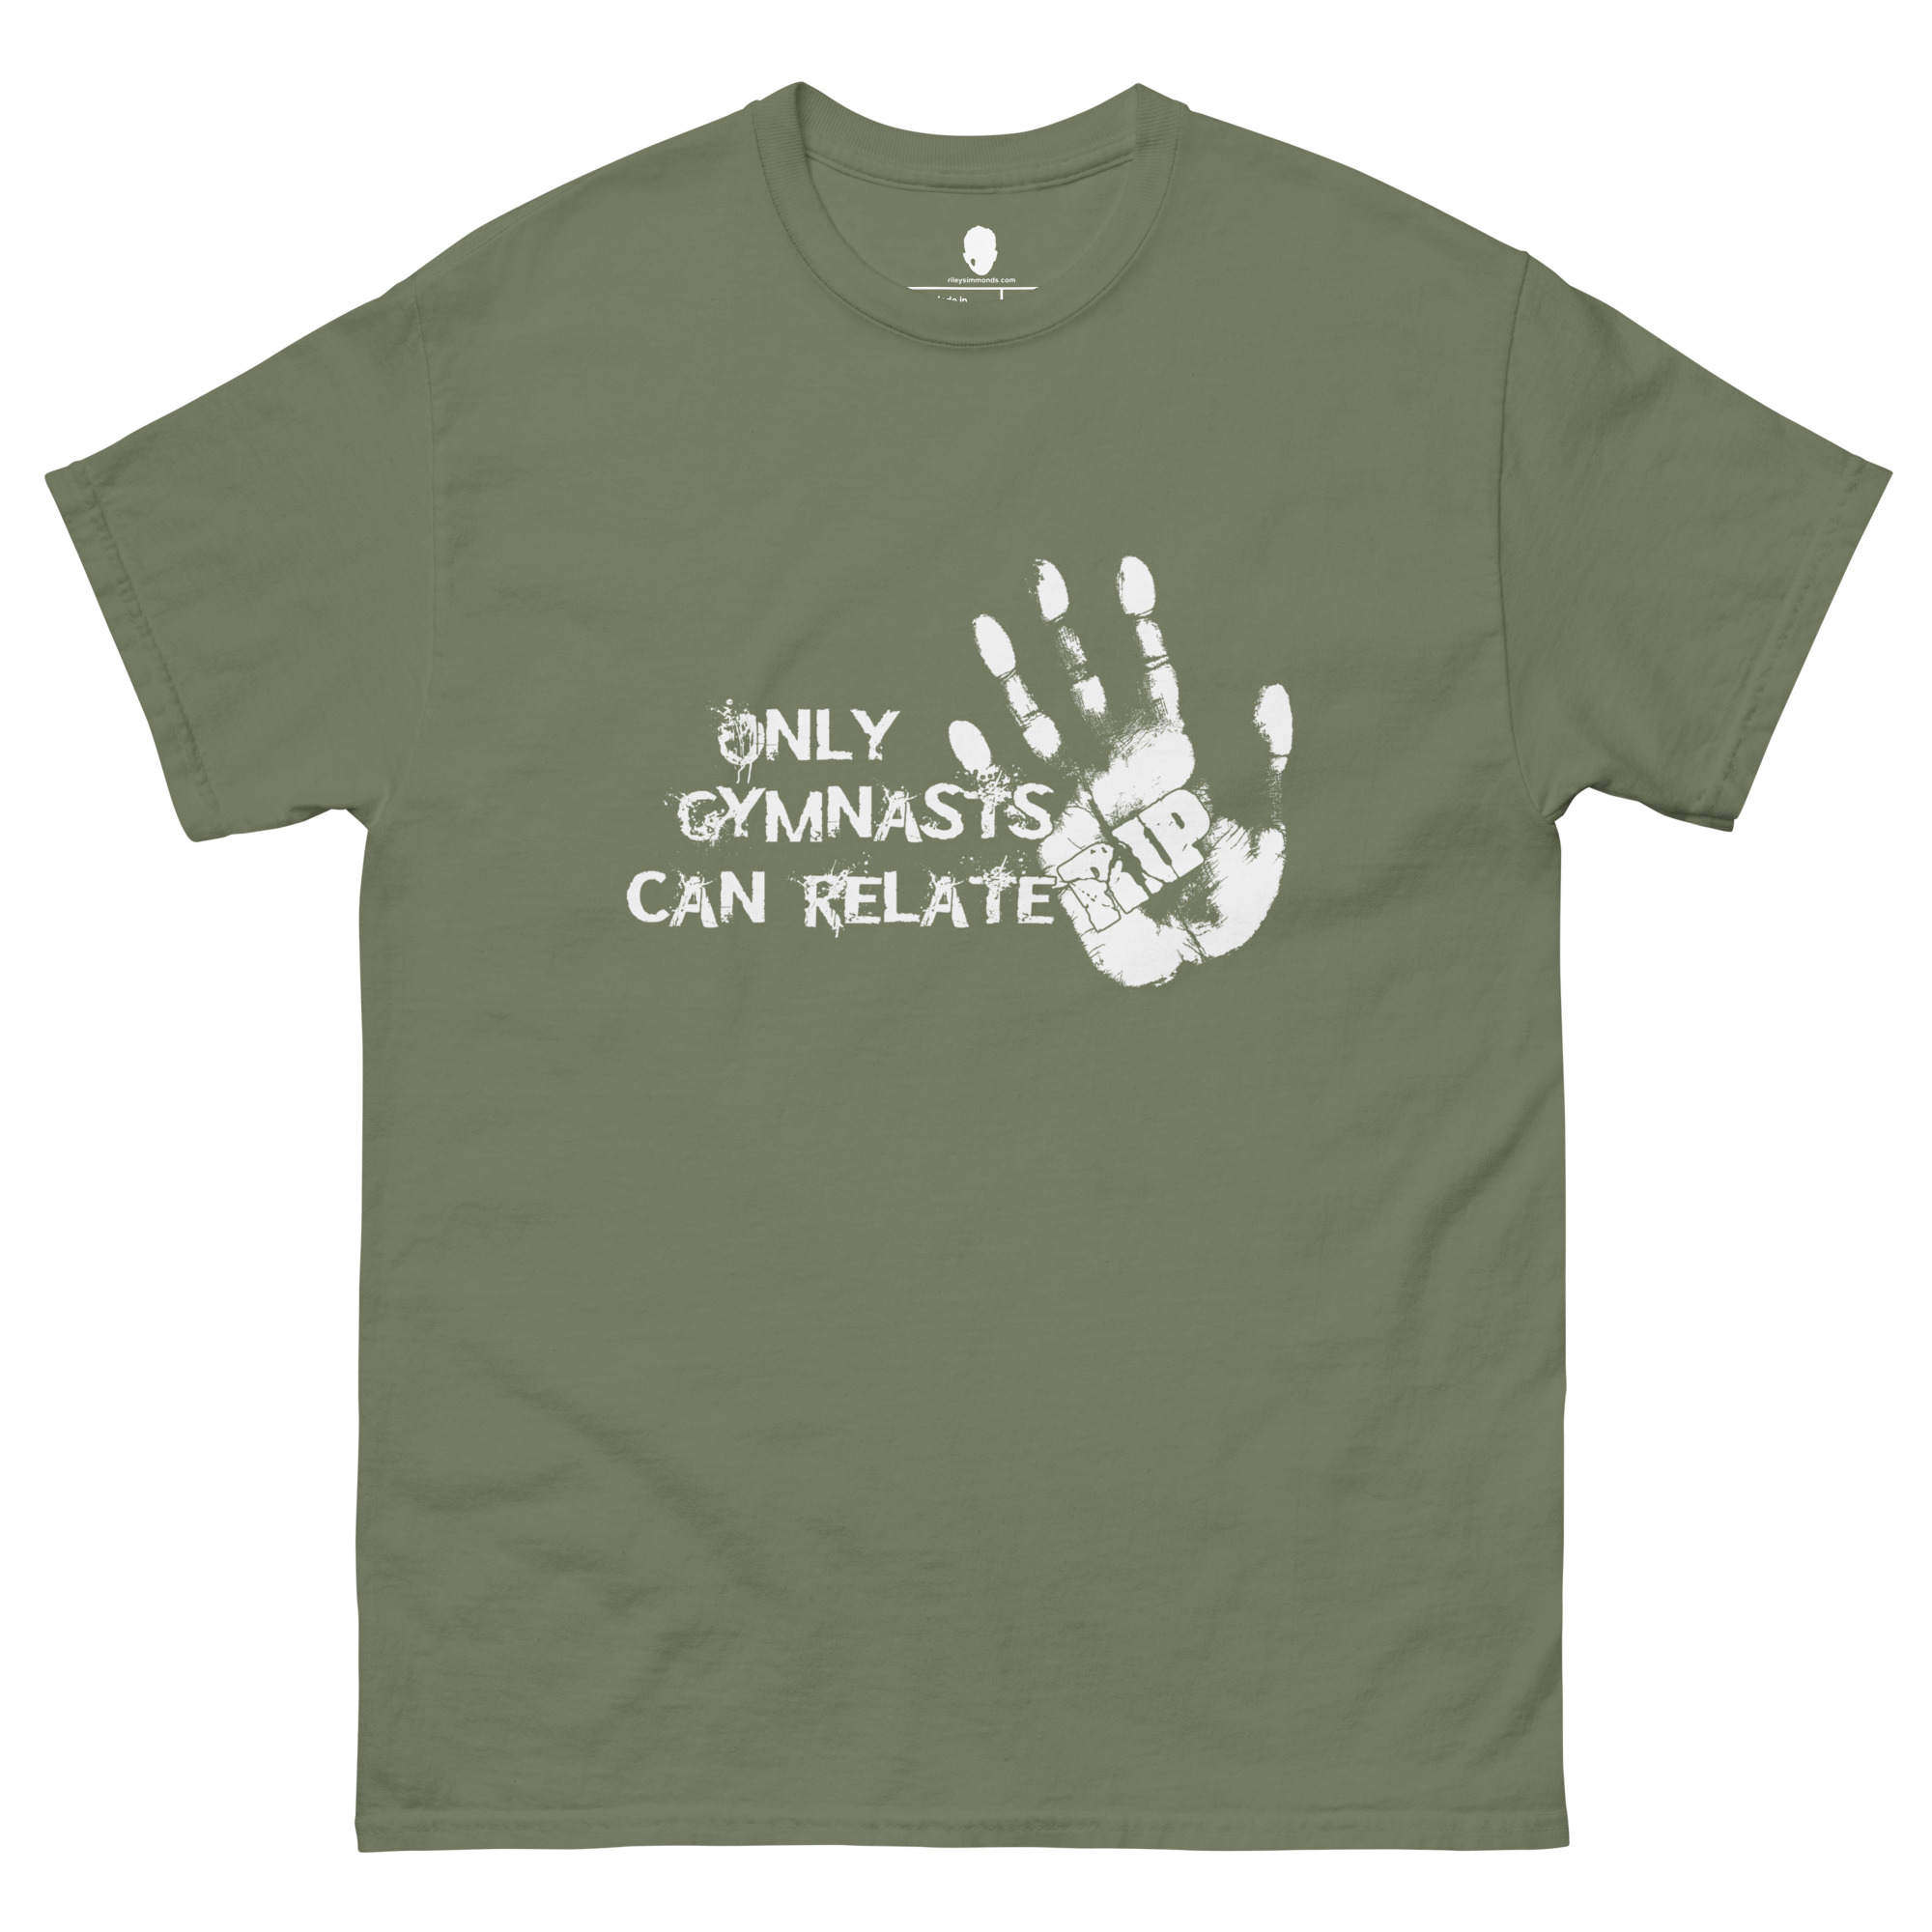 mens-classic-tee-military-green-front-65428d318ac47.jpg